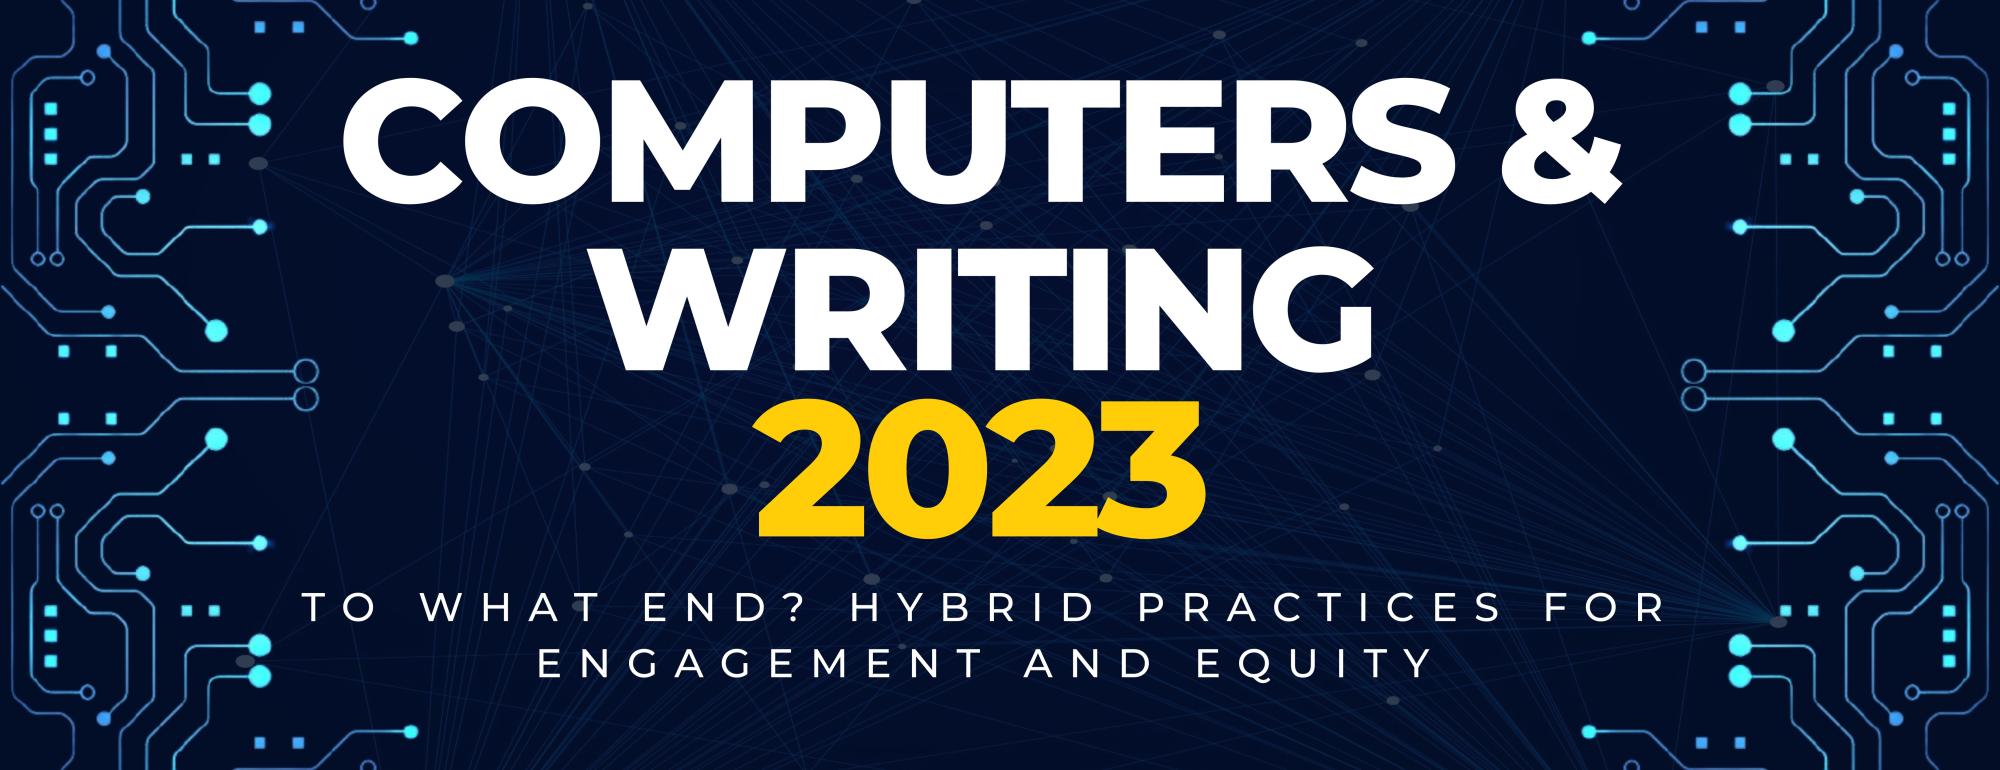 Banner for Computers & Writing 2023